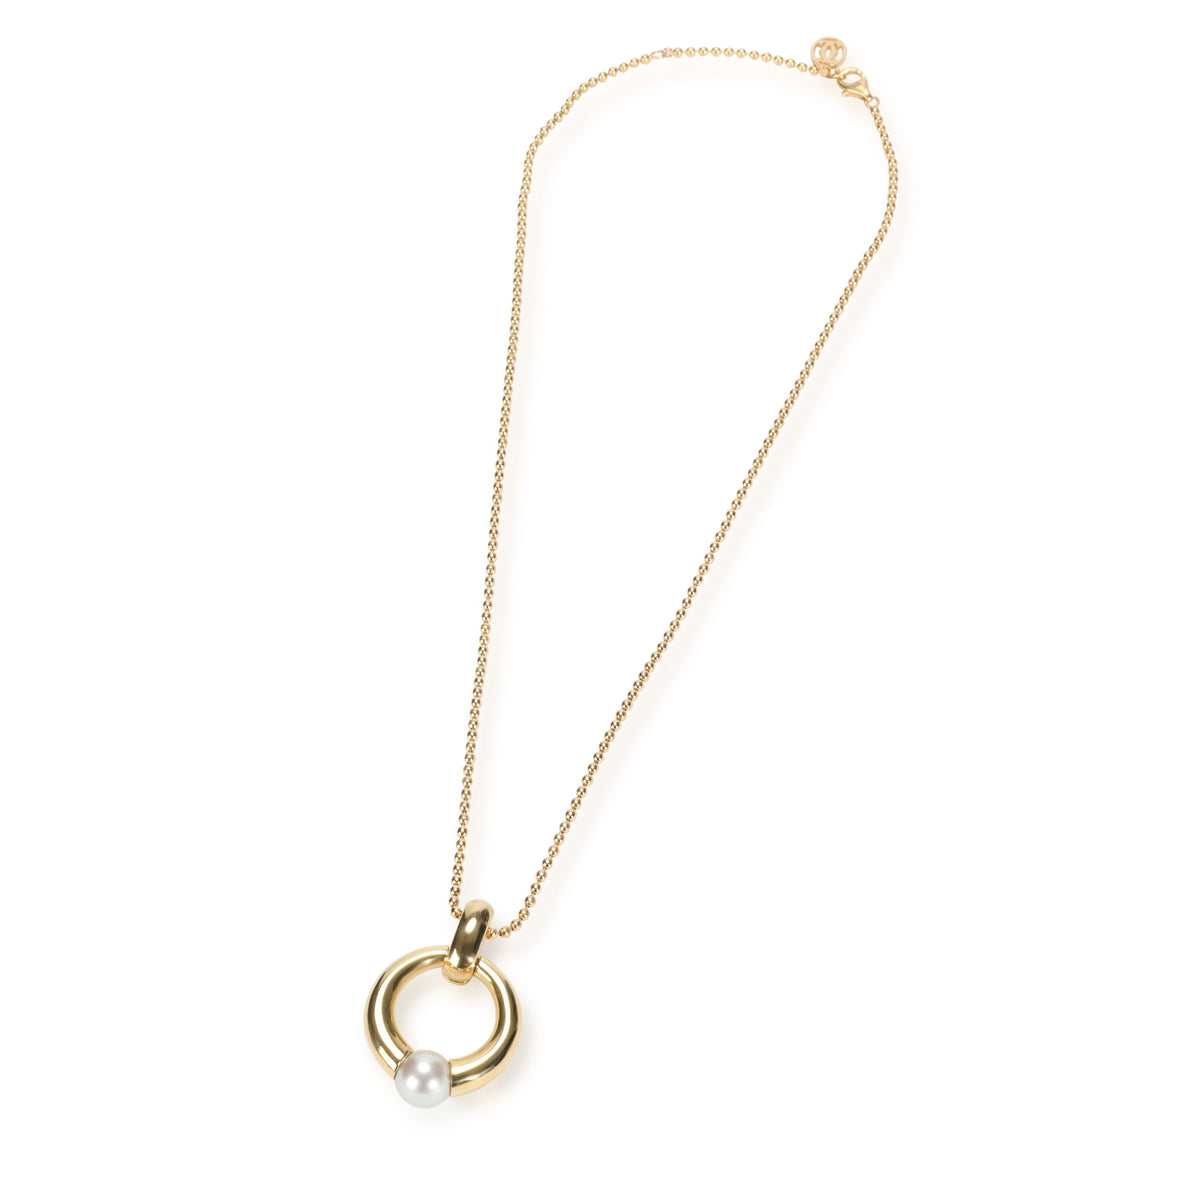 Vintage Cartier Pearl Necklace in 18K Yellow Gold